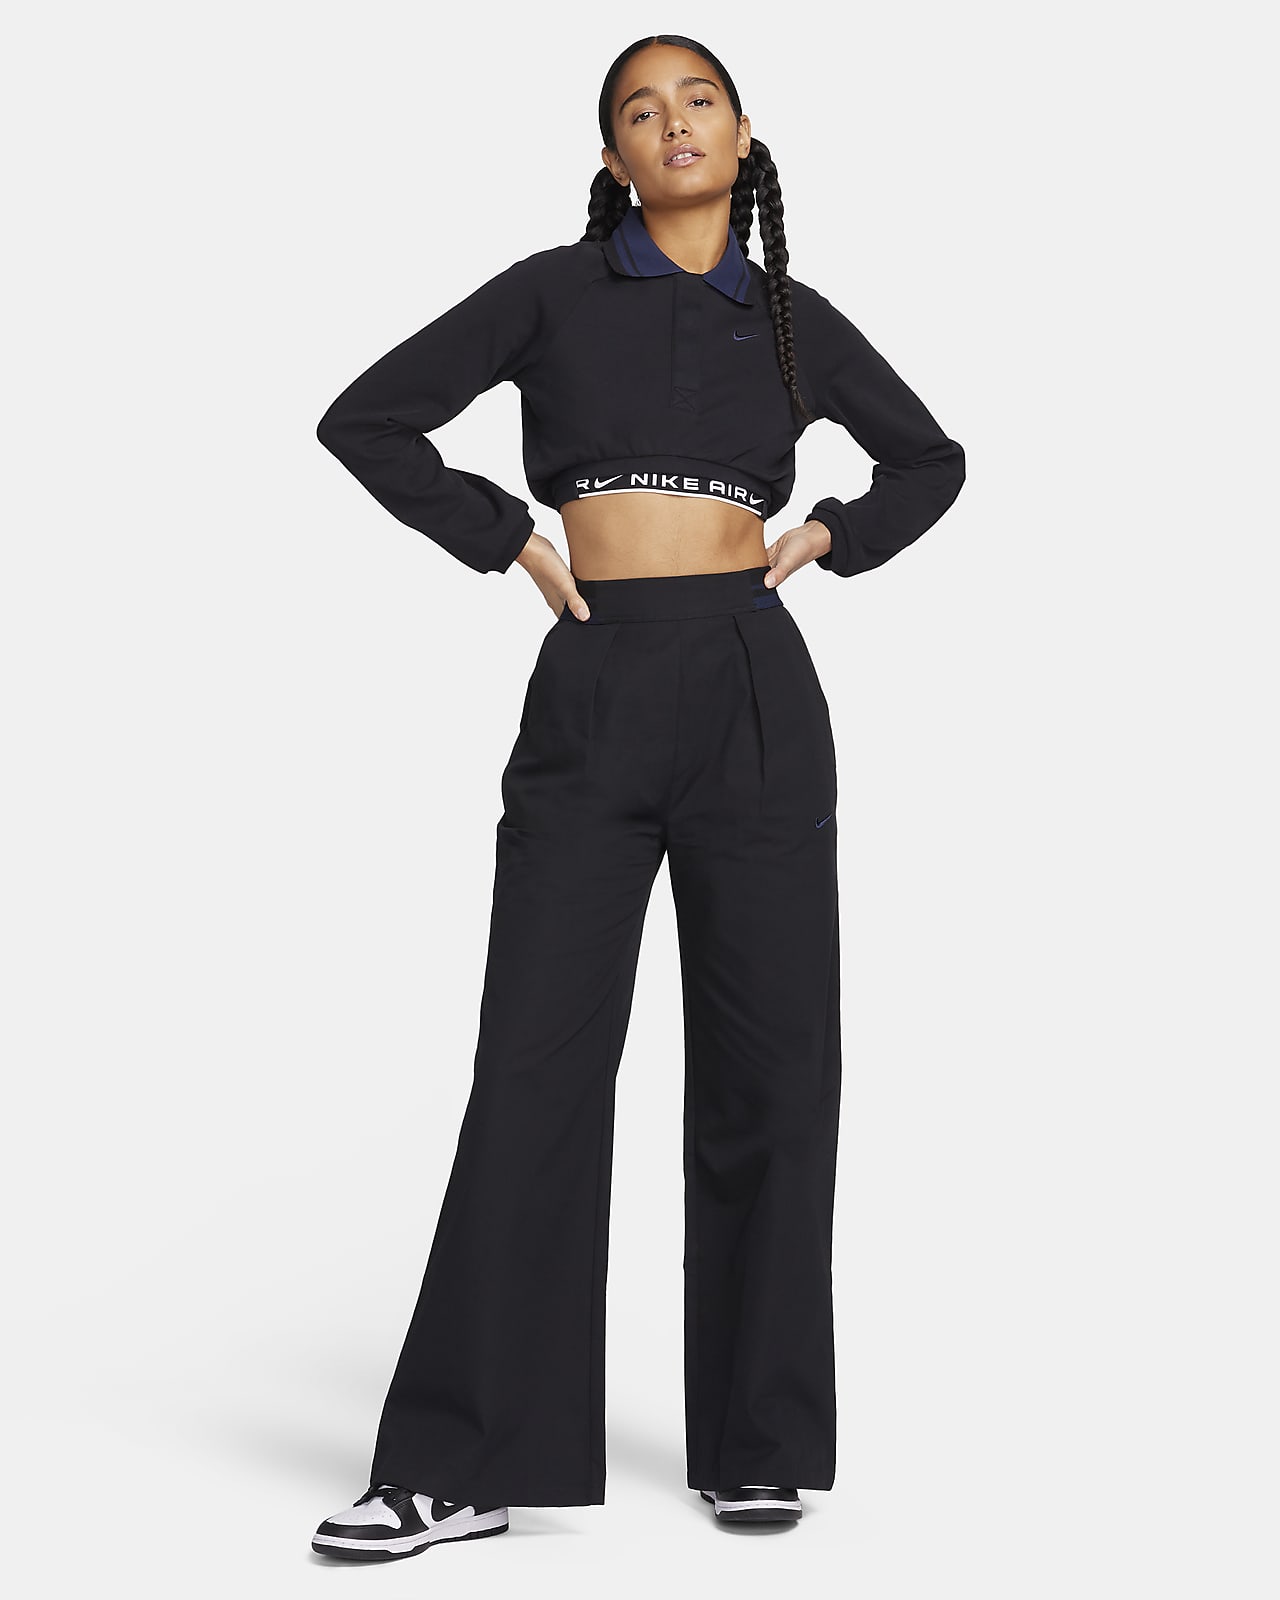 Nike Sportswear Collection Women's High-Waisted Pants.